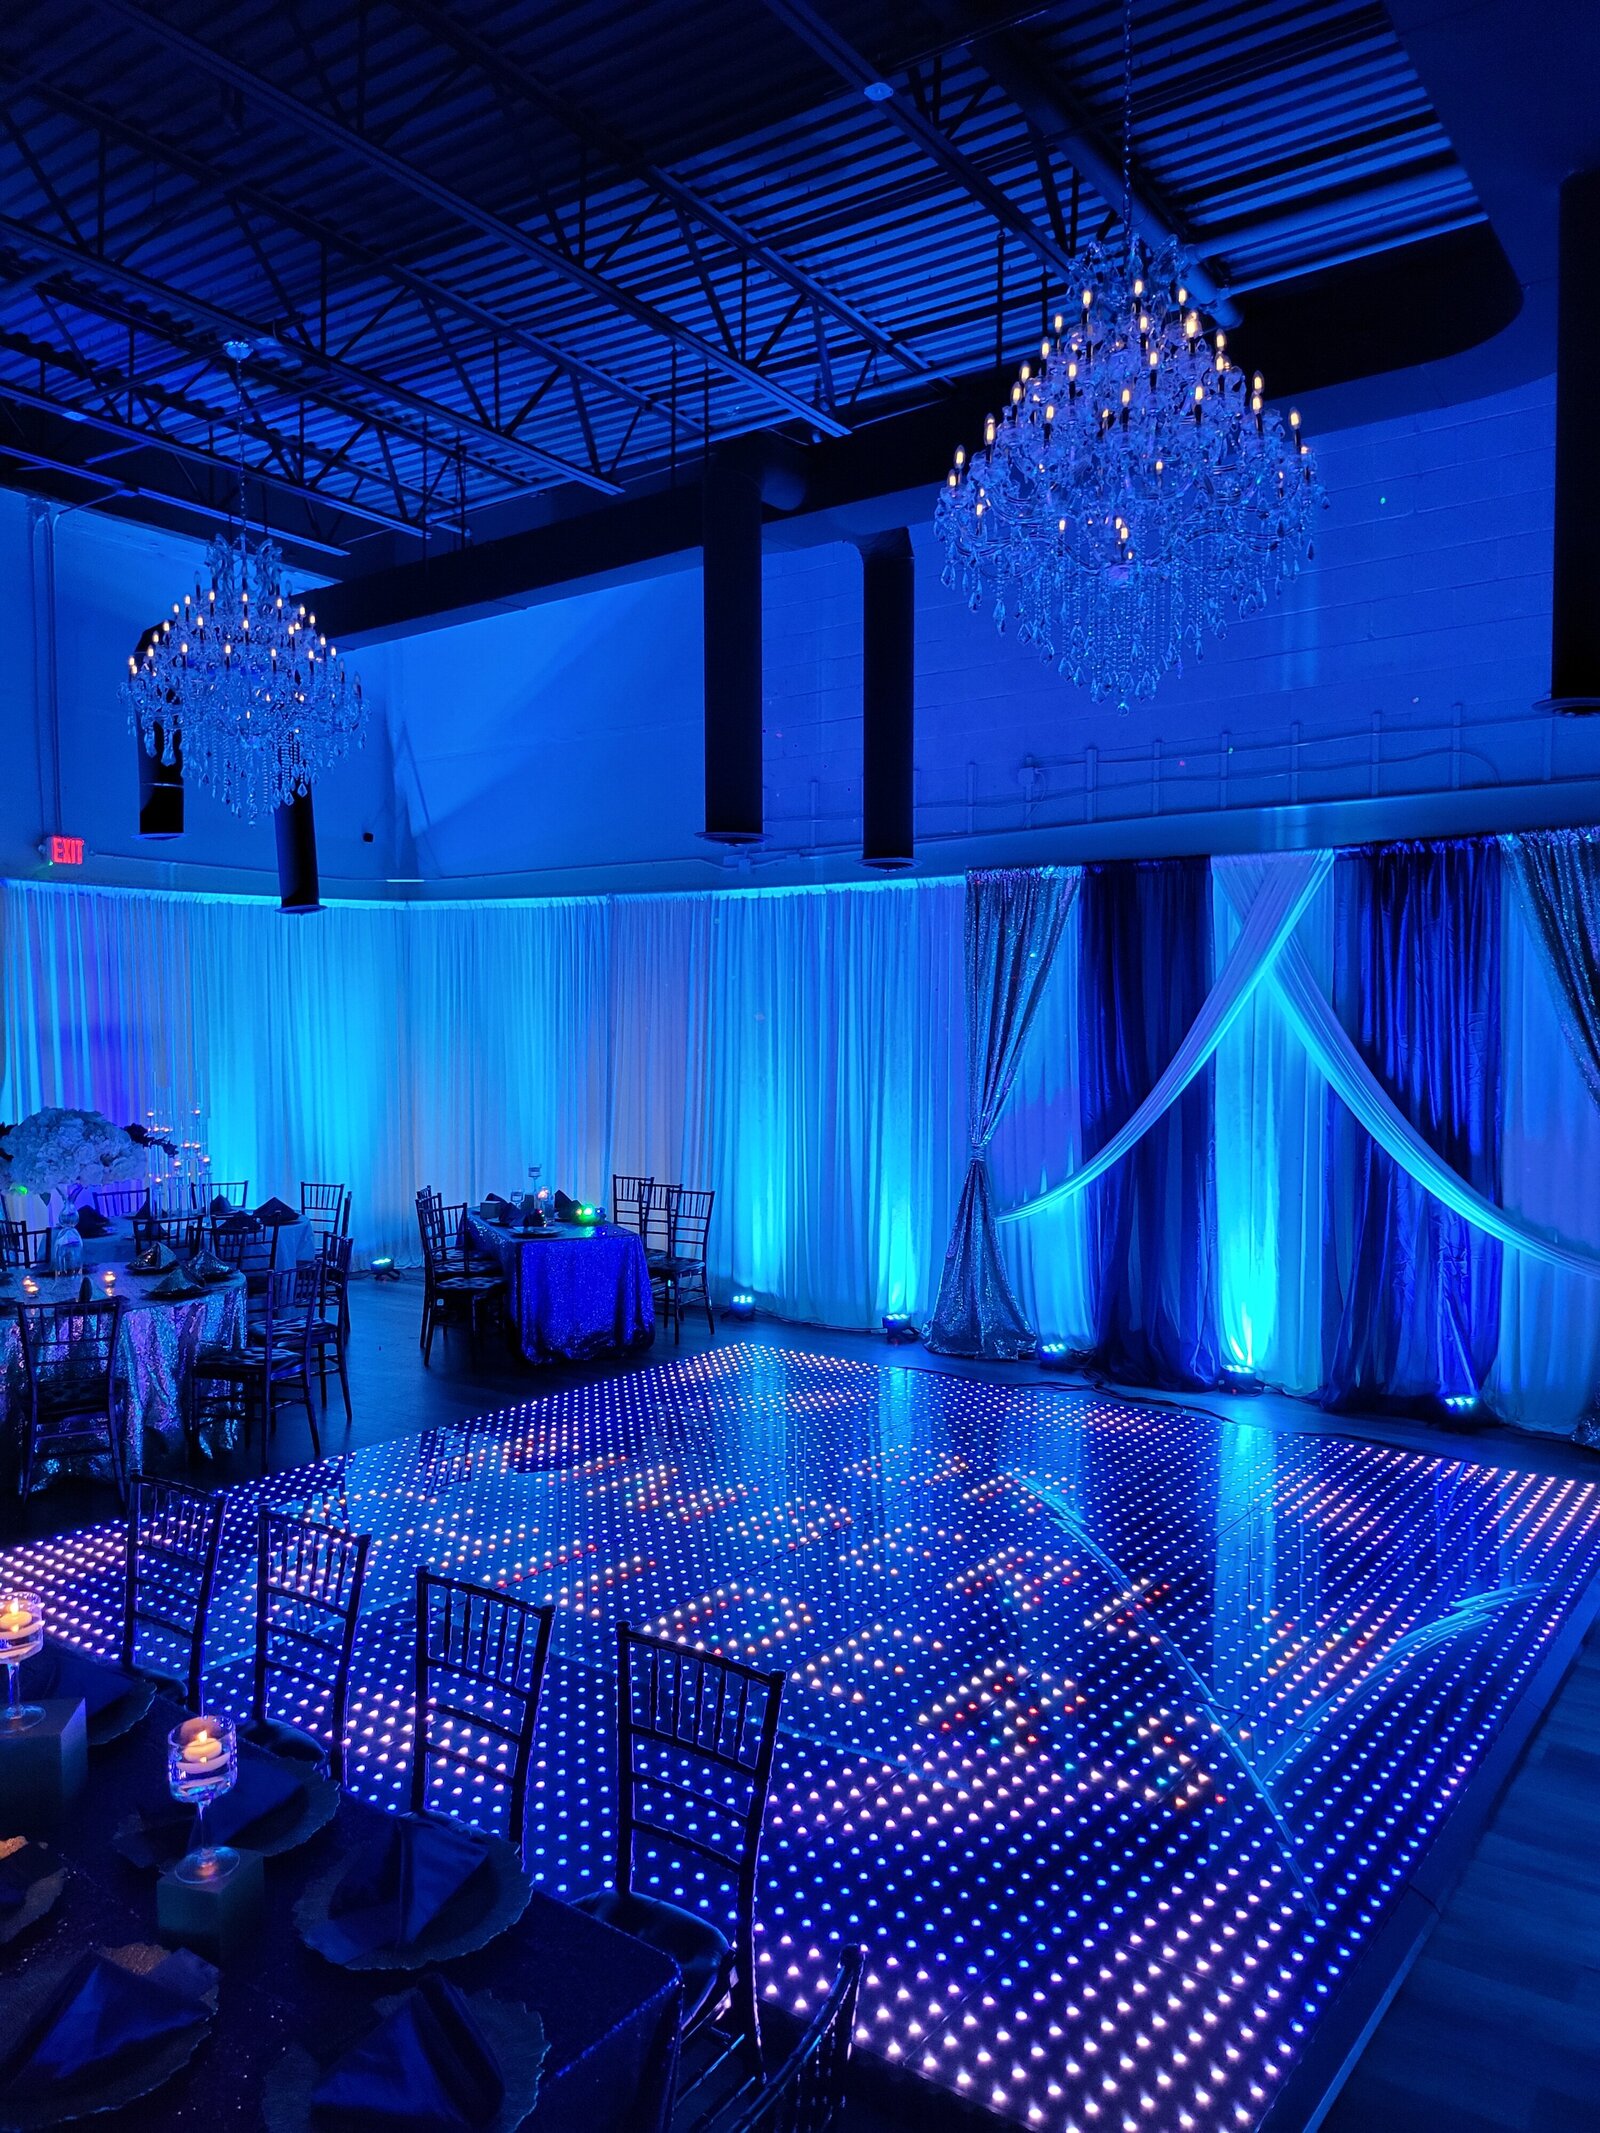 Create Your Own Event with Backdrop LED Dance Floor in Metro Detroit